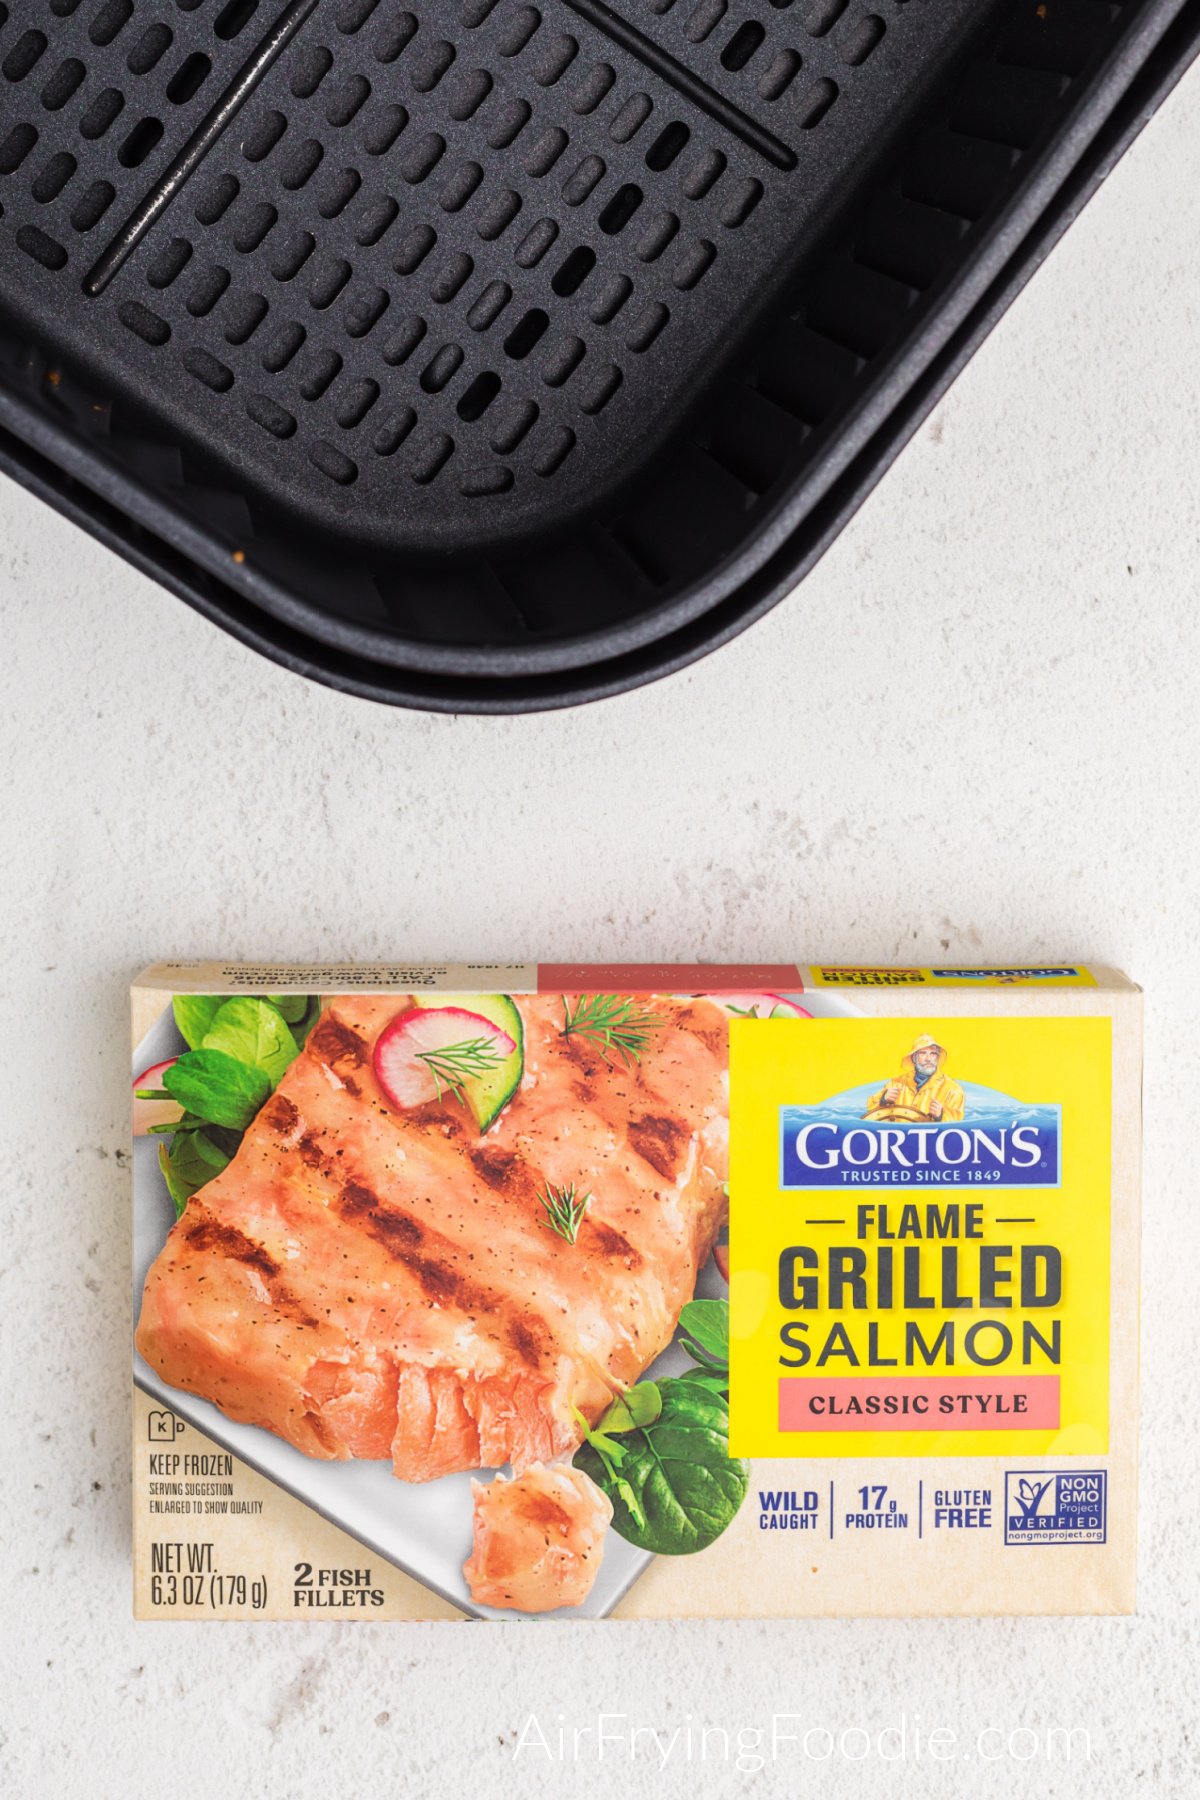 Air fryer basket and Gorton's flame grilled frozen salmon. 